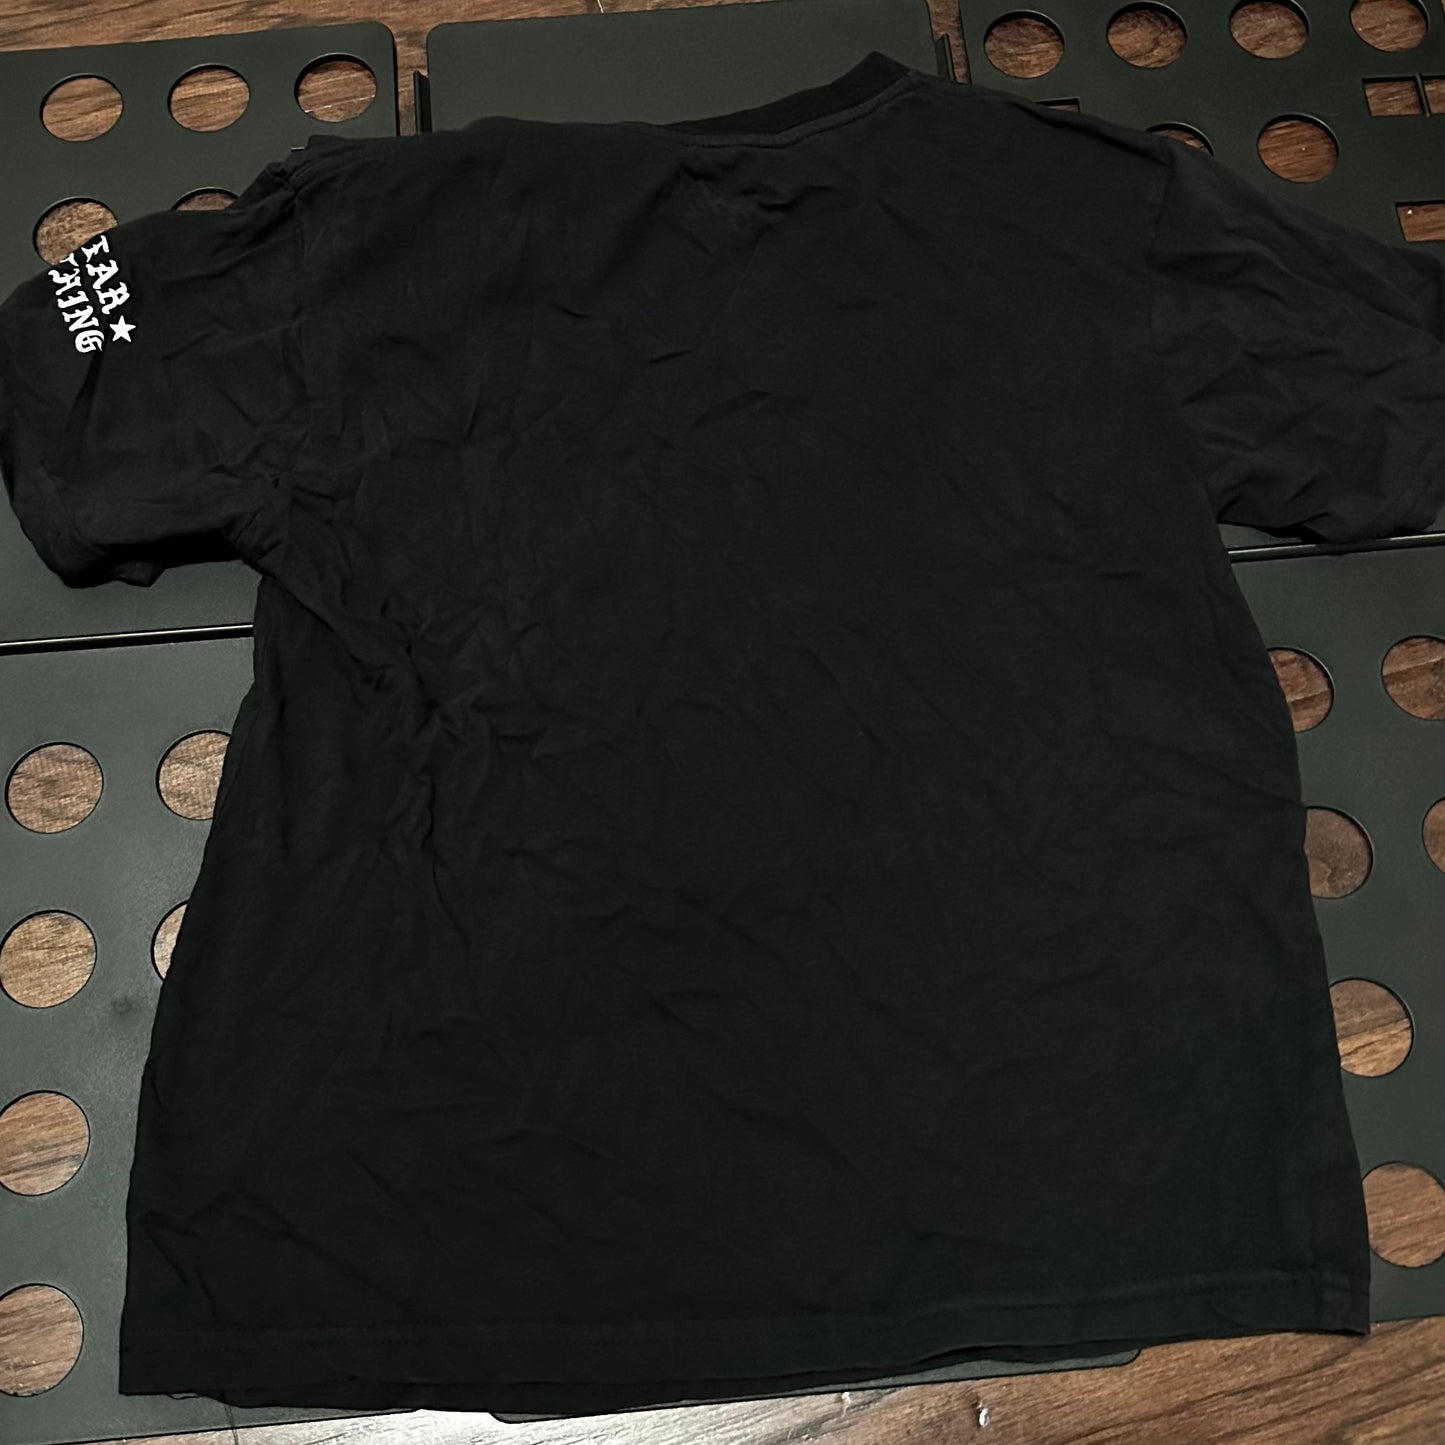 Eighty eight brand fear nothing shirt - Youth Large